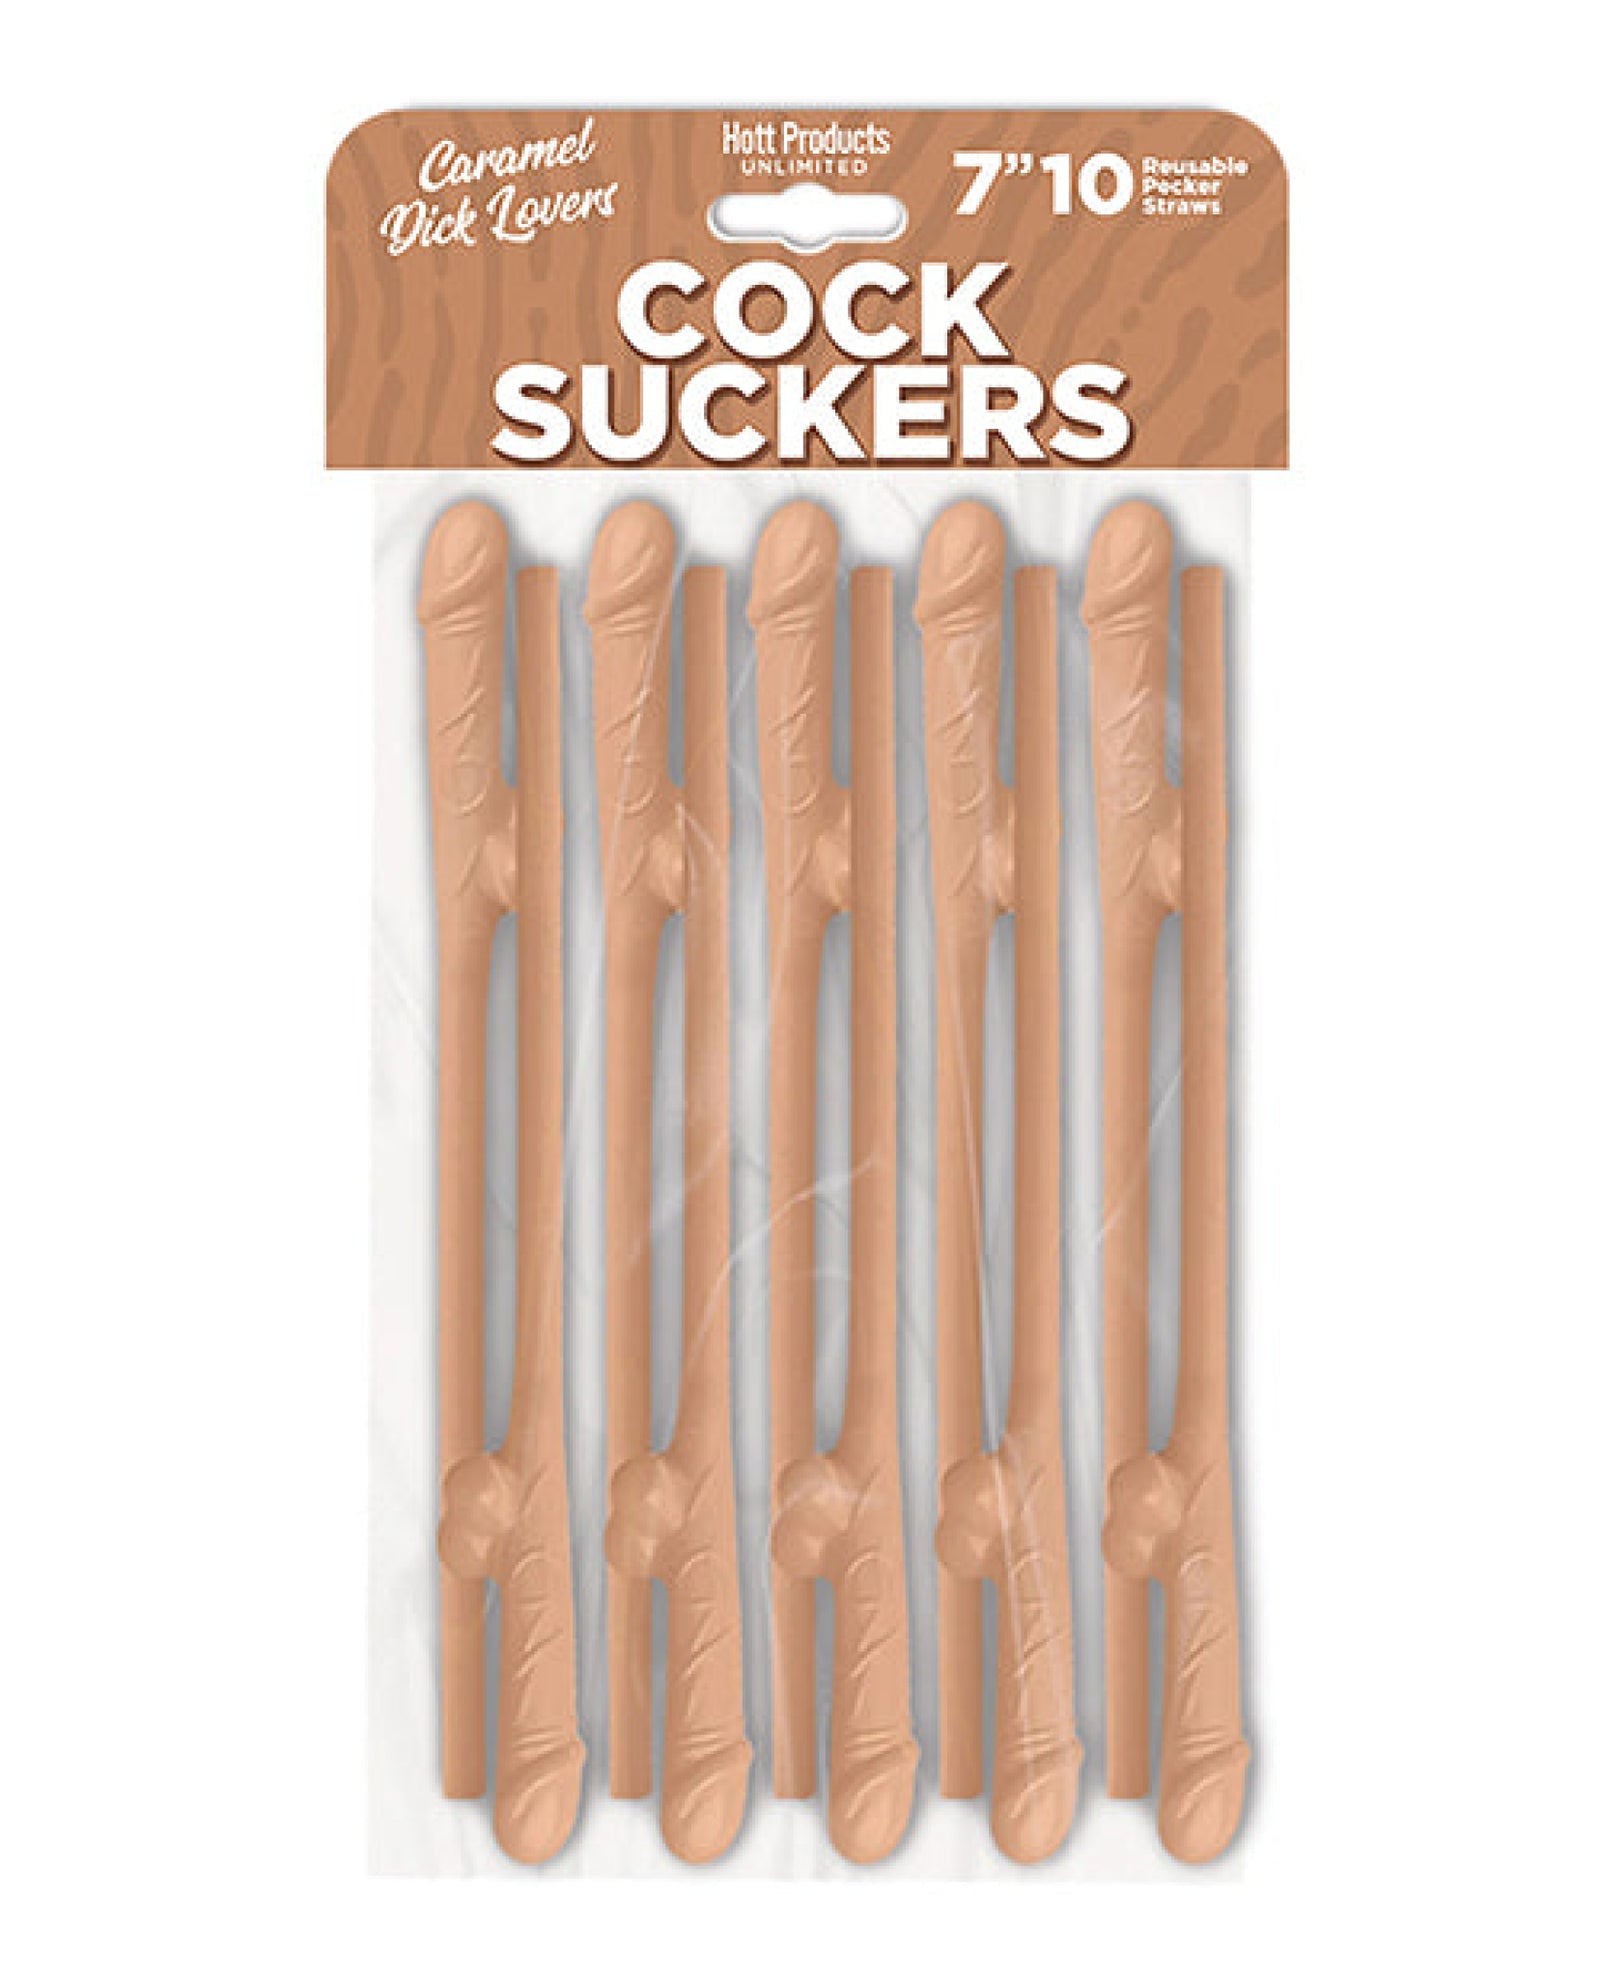 Cock Suckers Pecker Straws - Caramel Lovers Pack Of 10 Hott Products